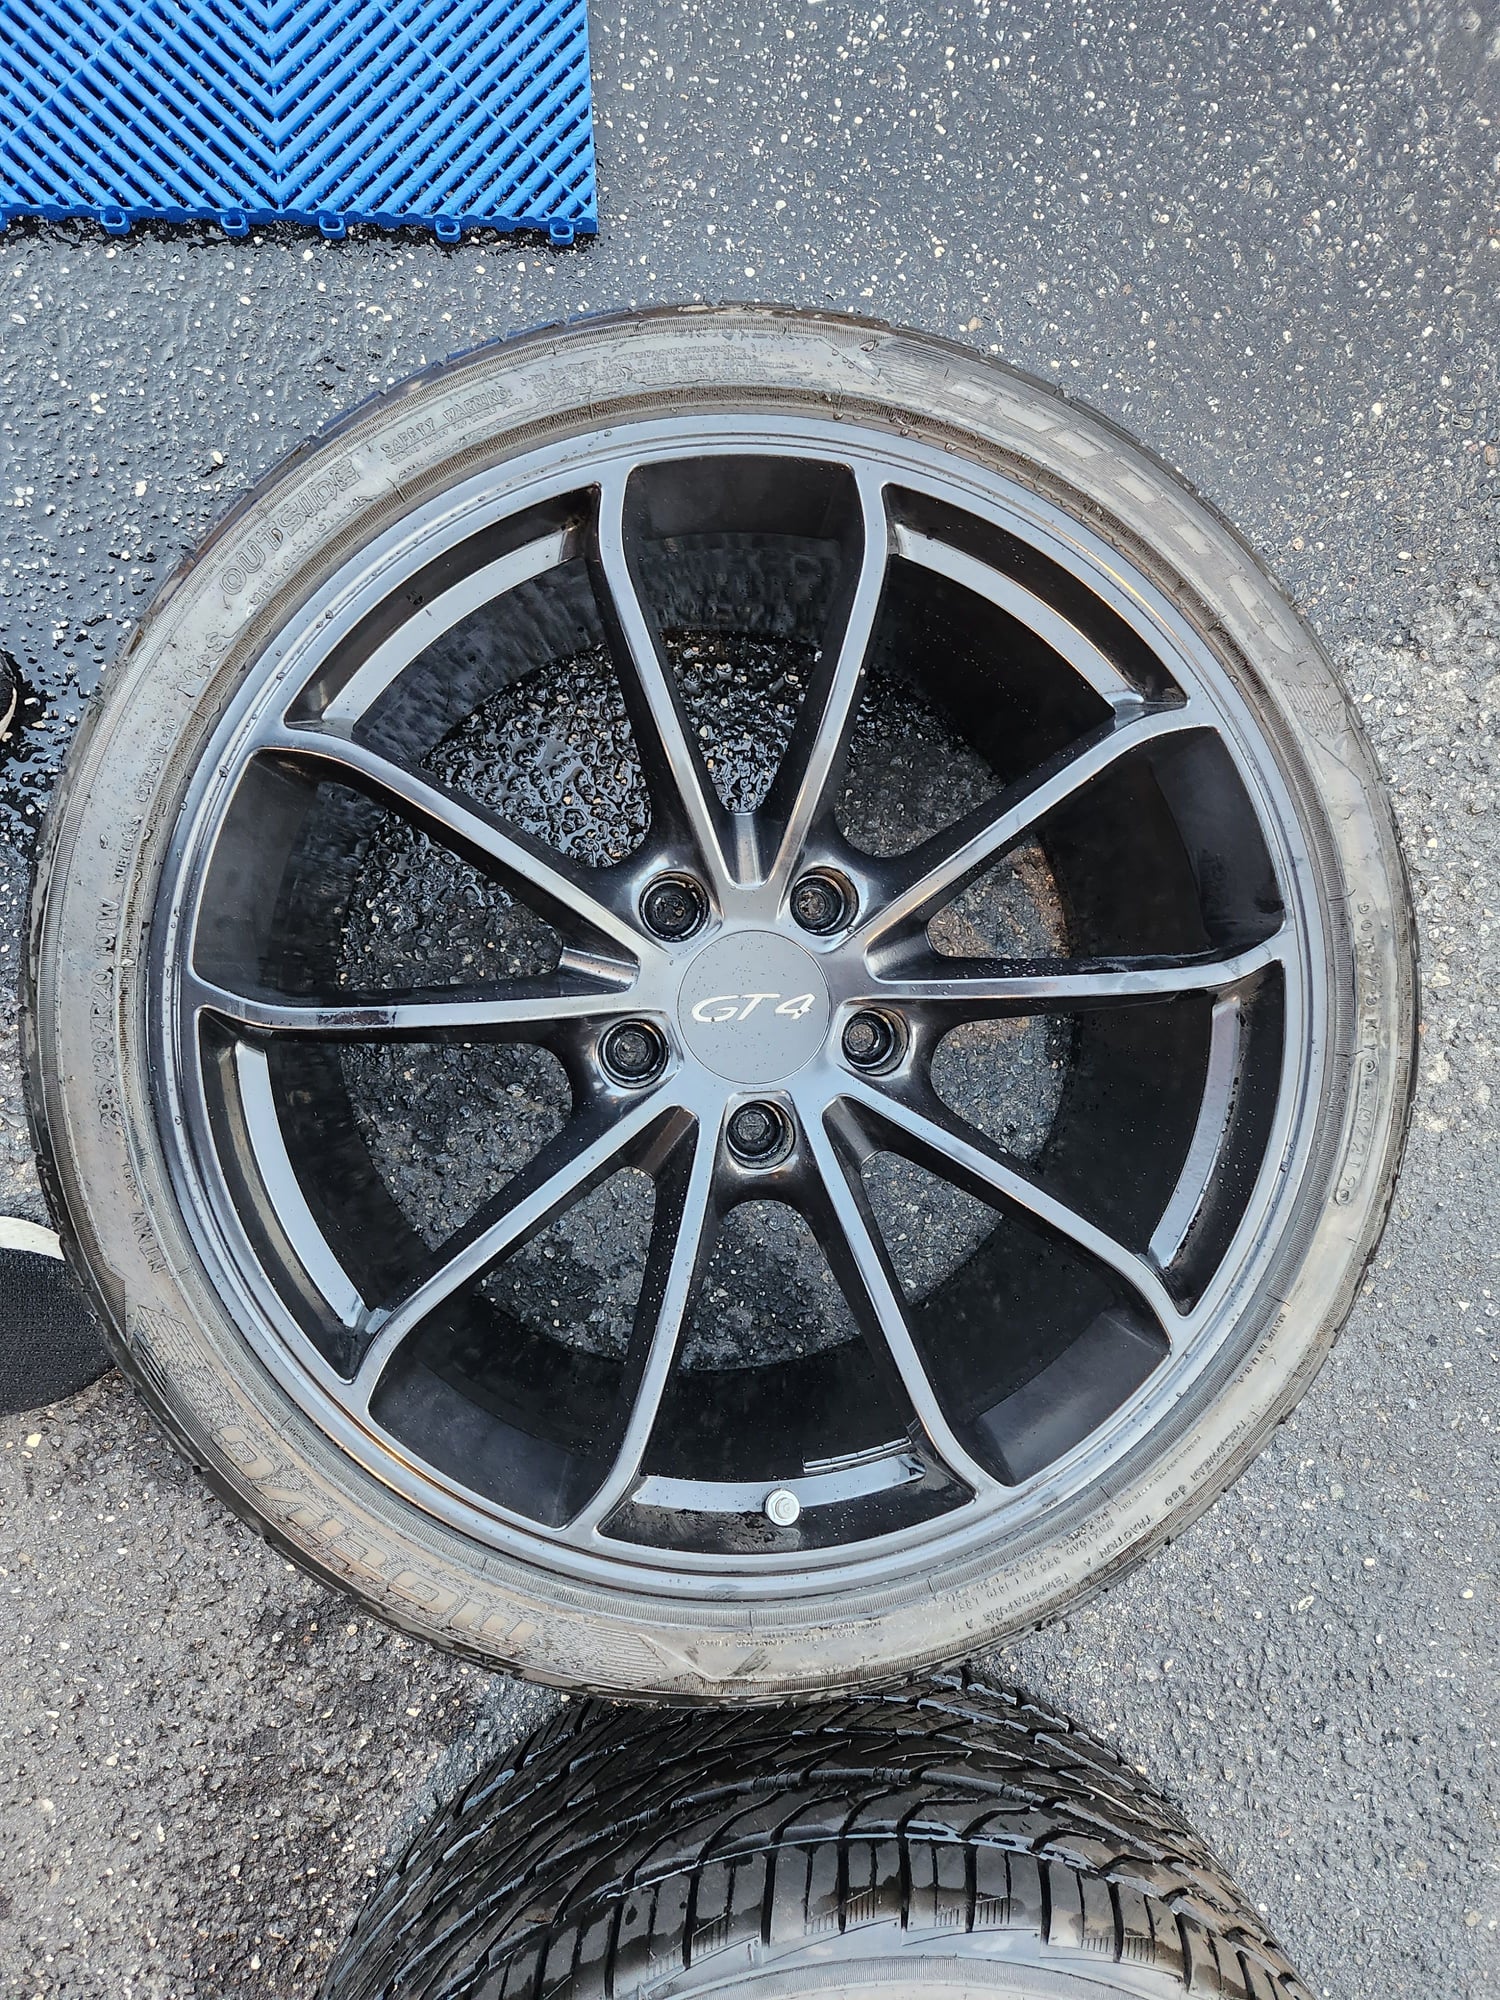 Wheels and Tires/Axles - Cayman GT4 Factory Wheels with like new Nitto Motivo High Performance All Season - Used - Huntington, NY 11743, United States